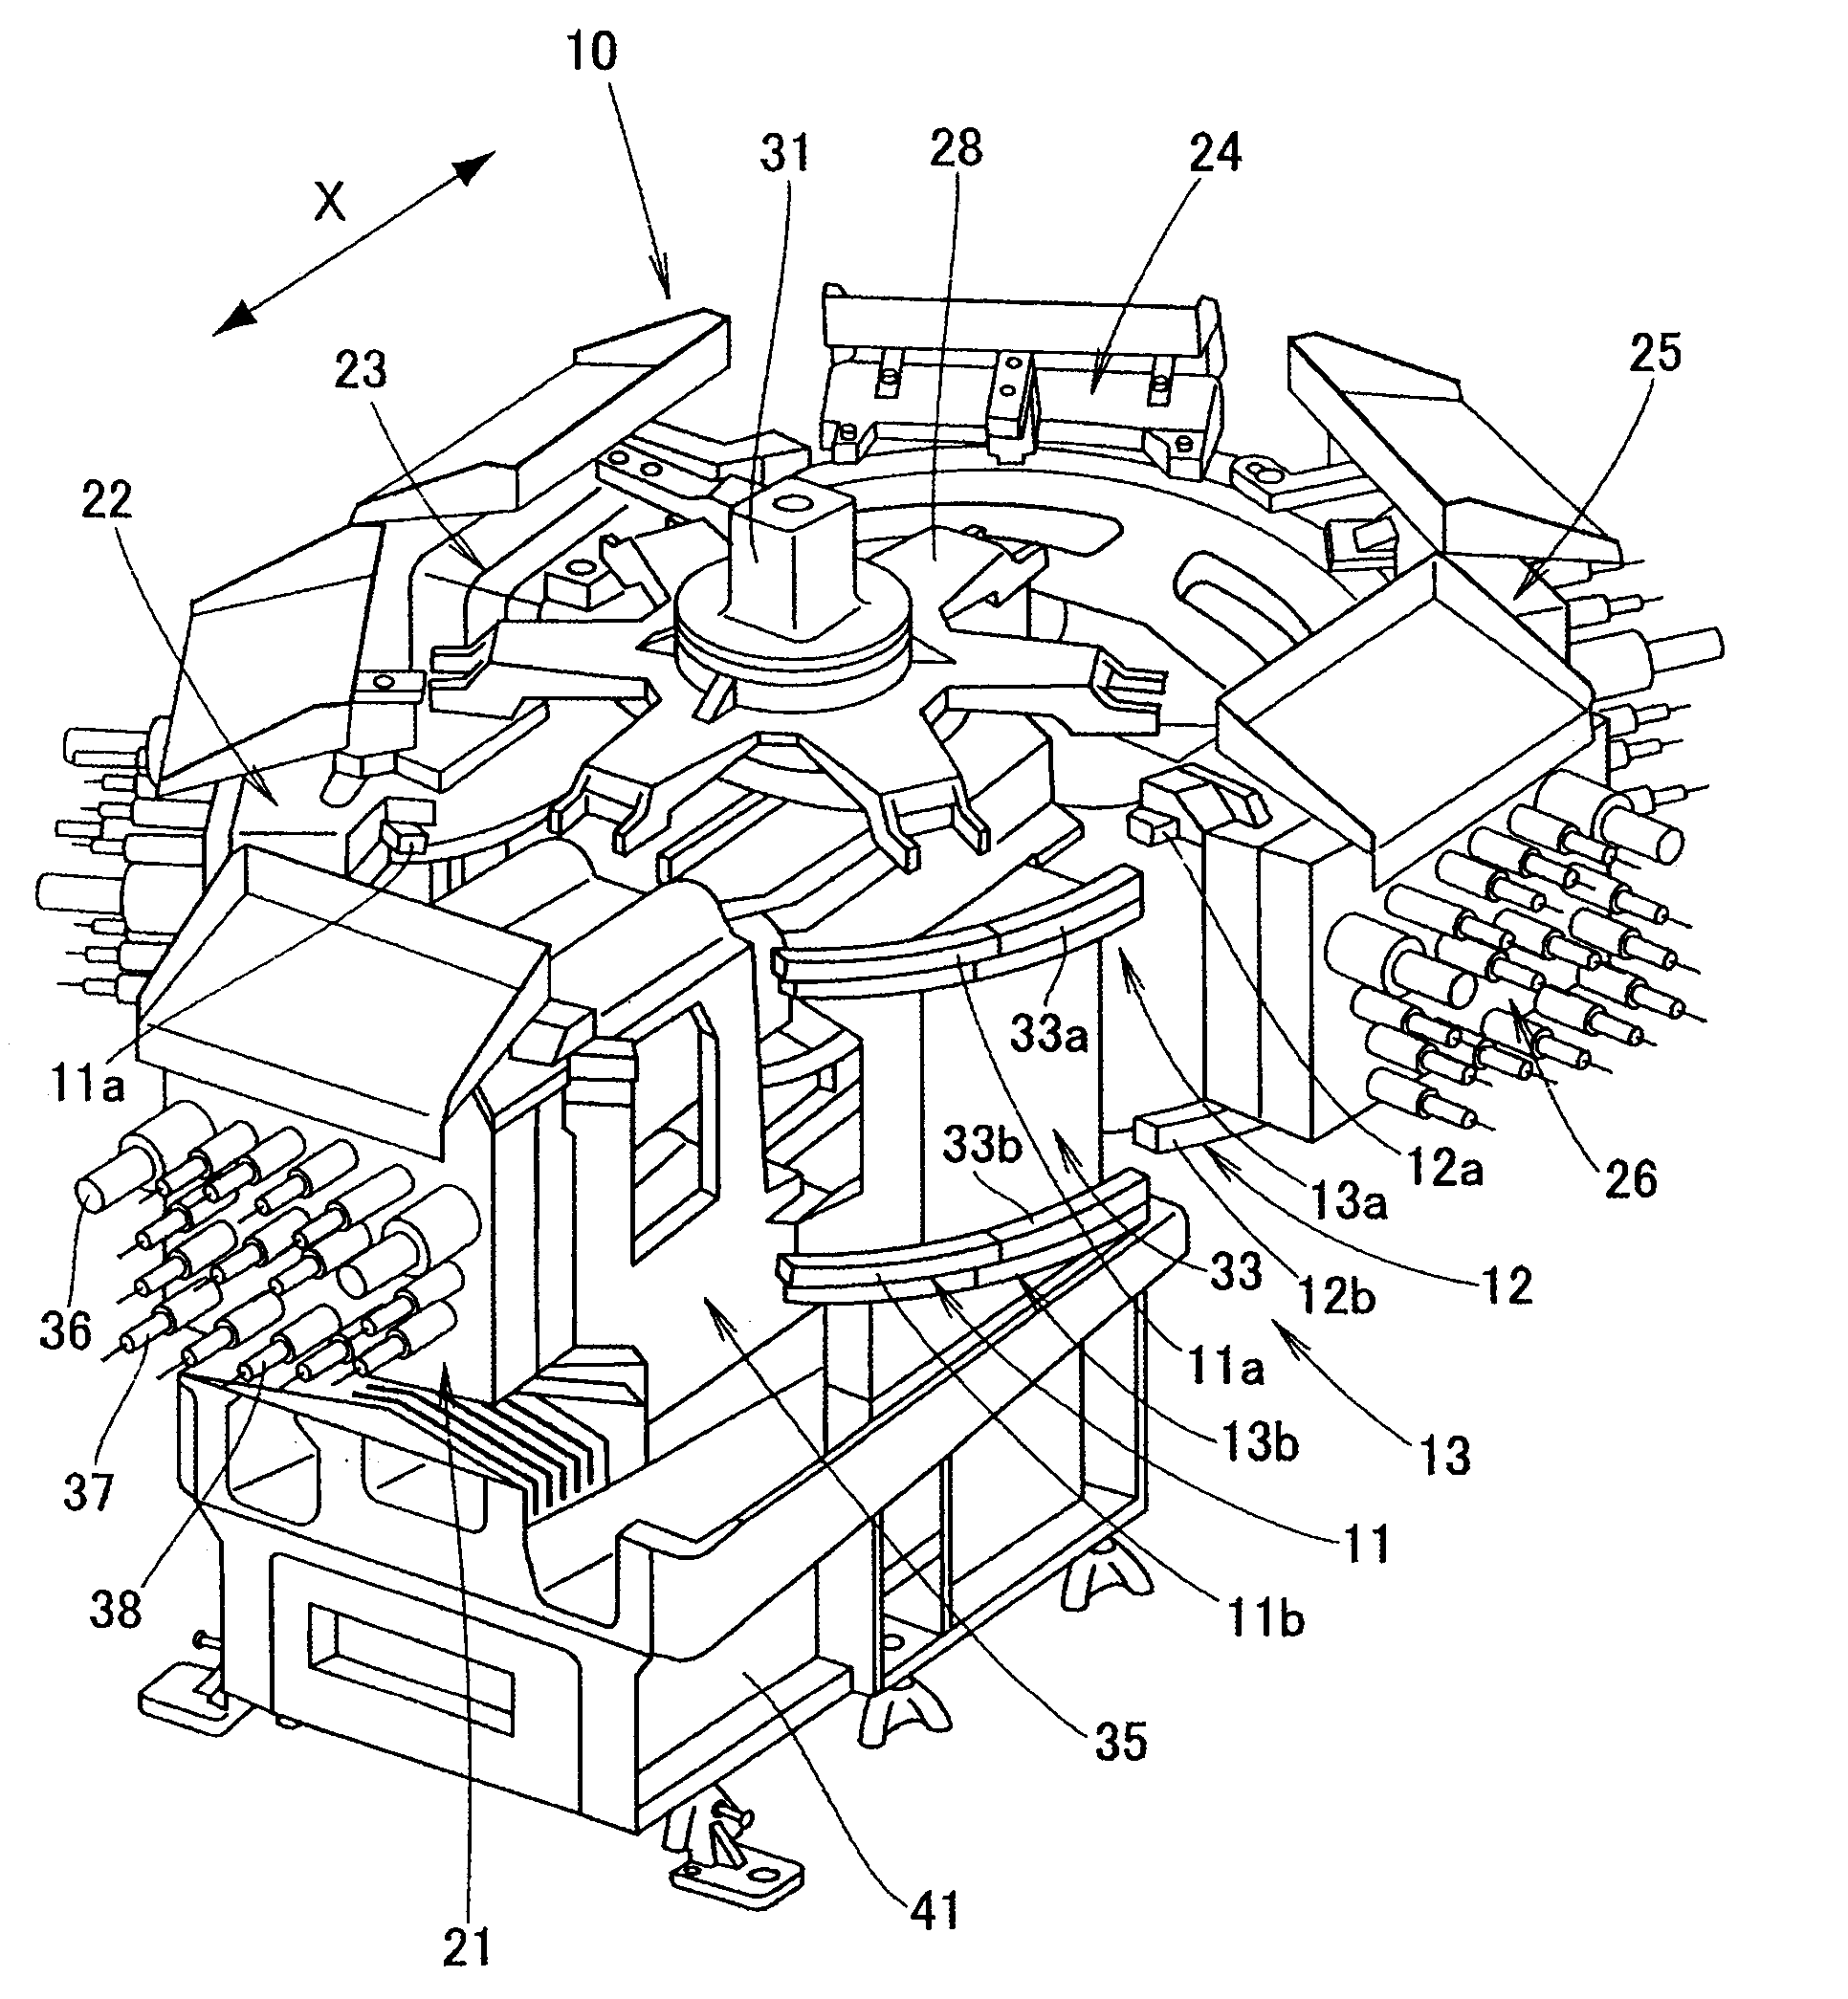 Multi-spindle head exchangeable machine tool